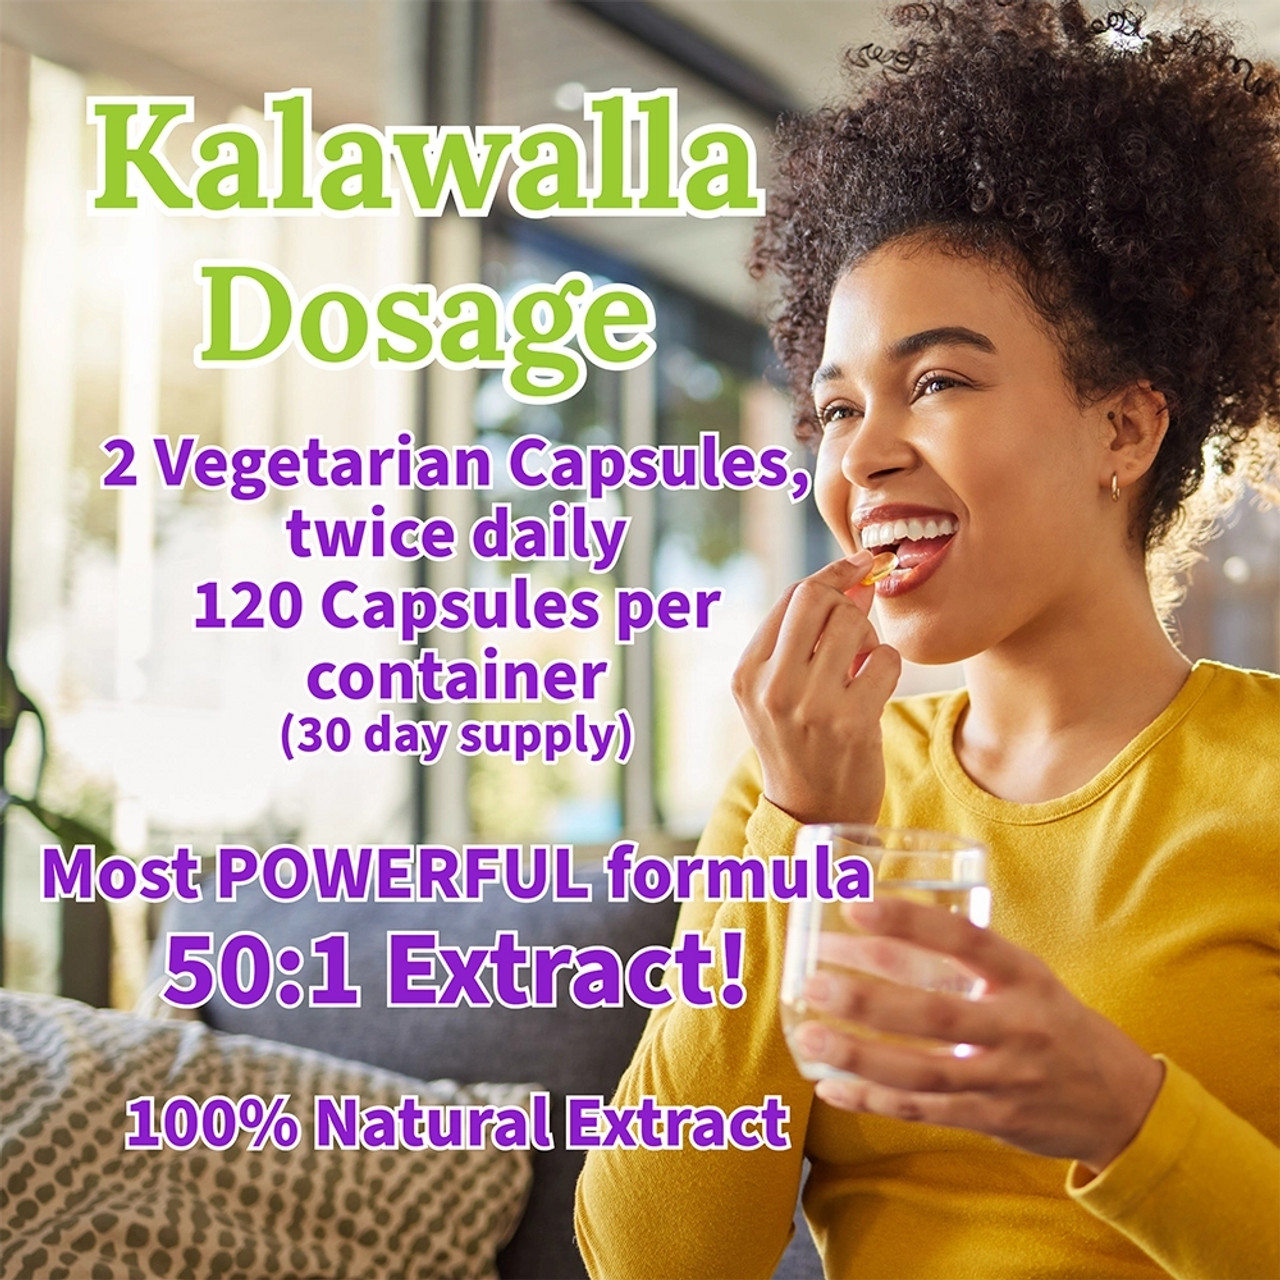 DOSAGE RECOMMENDATION: Every bottle of Organic Hope Kalawalla contains 120 capsules. With the recommended dose of two capsules, two times daily, each bottle is a 30-day supply to invigorate your immune system and restore vitality.